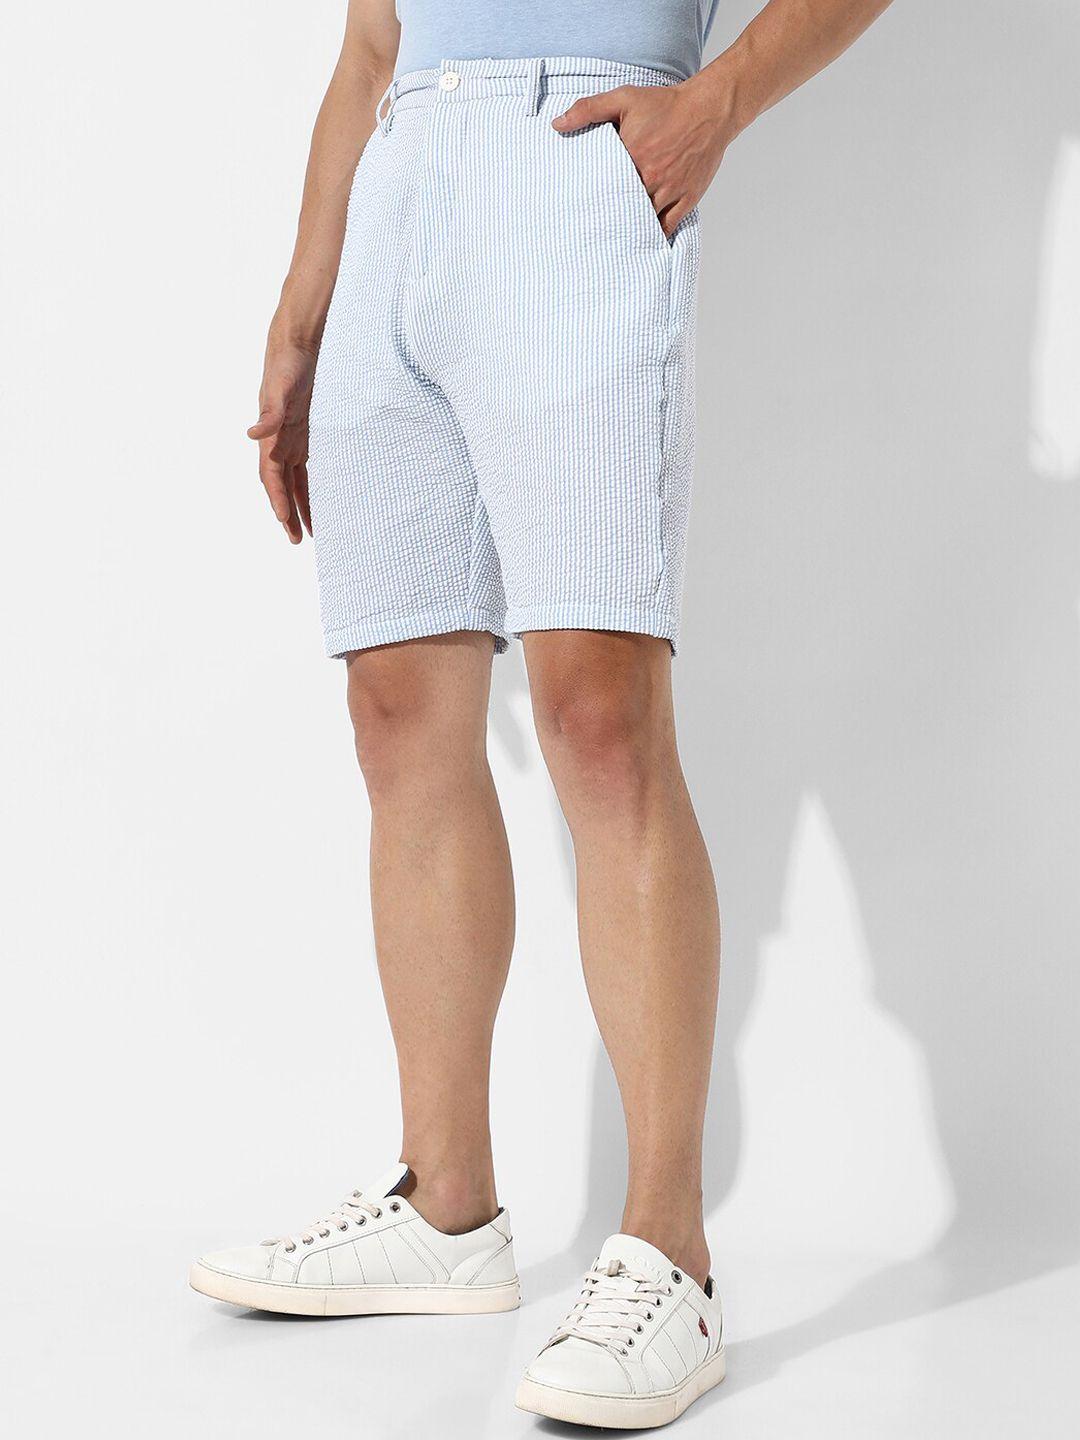 campus sutra men striped mid-rise cotton shorts